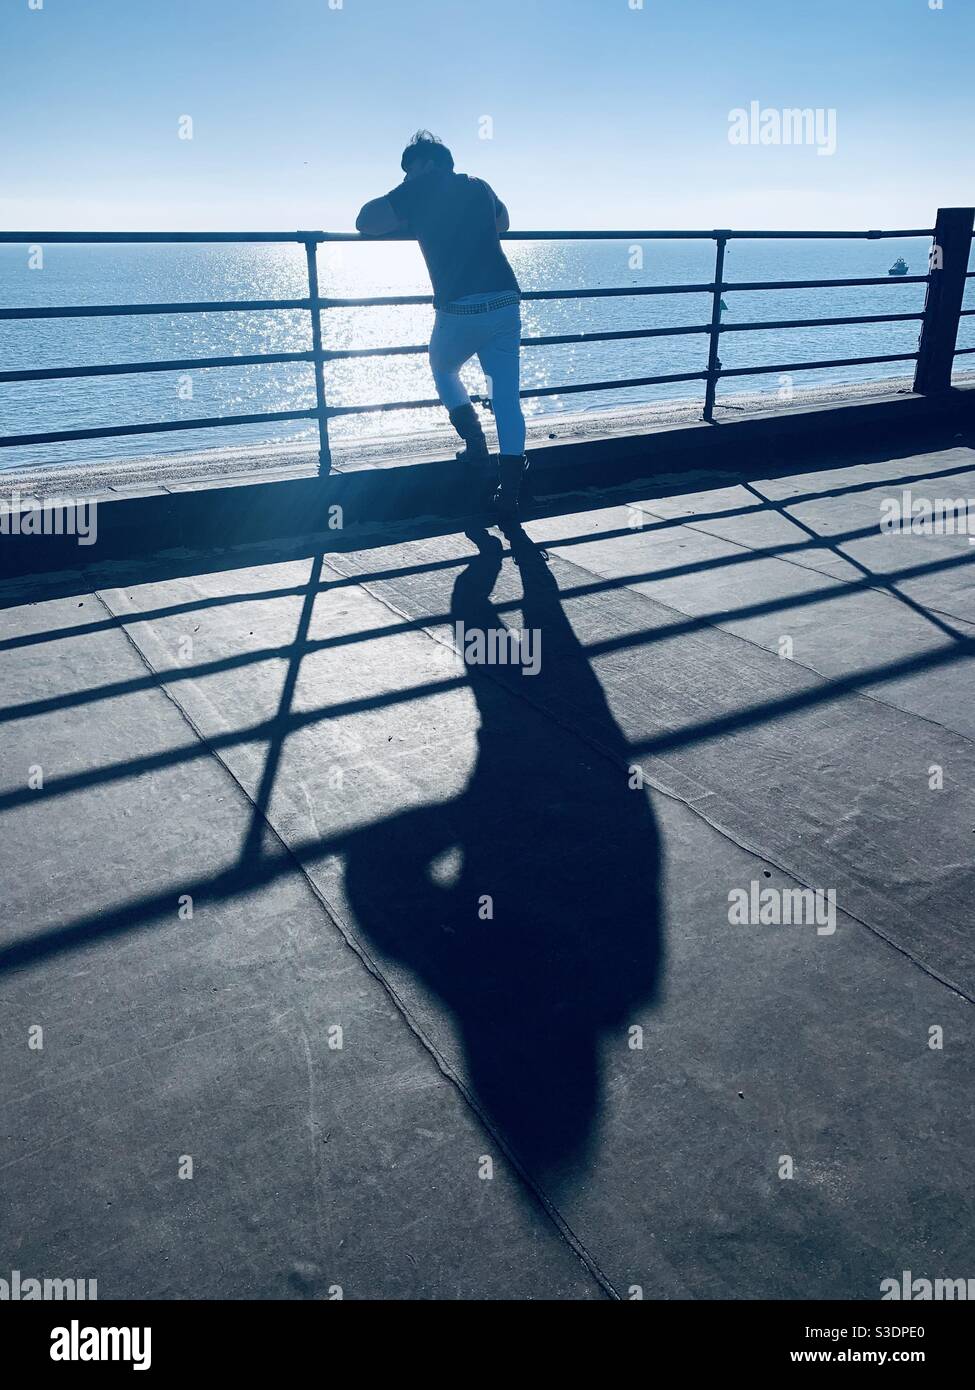 Silhouette of man leaning against railing with sea in background and long shadow Stock Photo